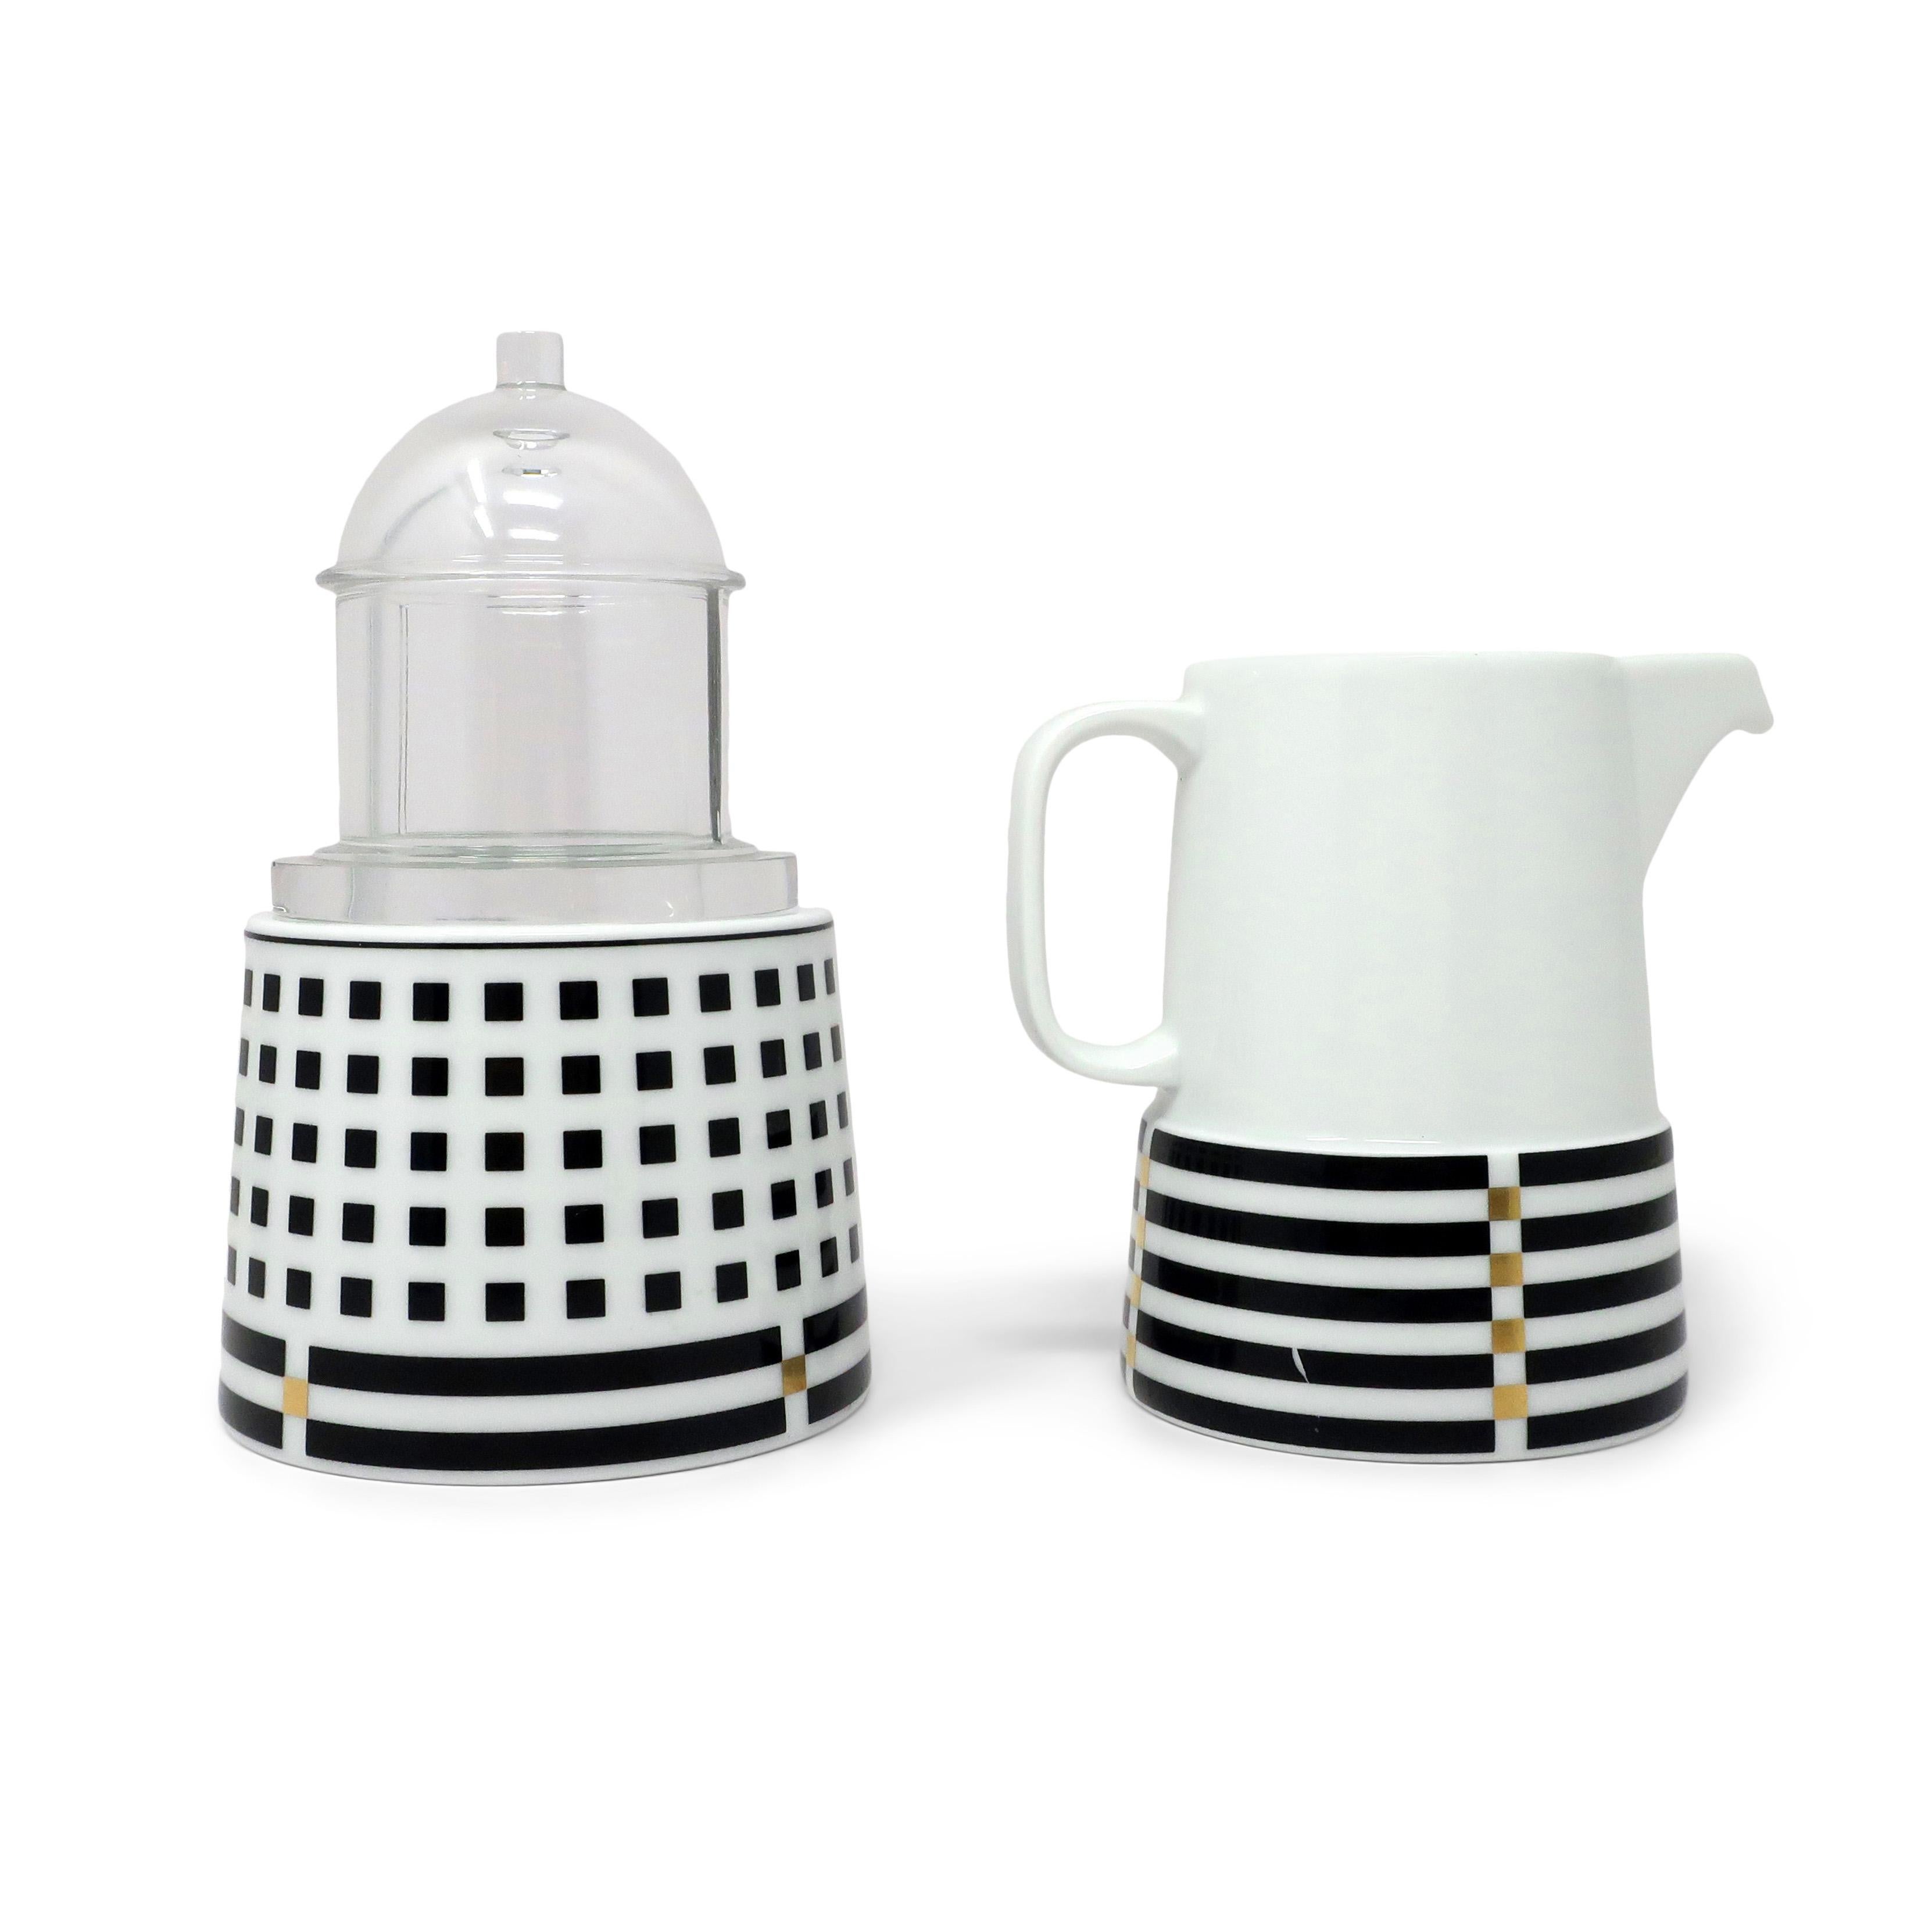 A beautiful set of porcelain creamer and sugar bowl designed by Aldo Rossi for Rosenthal Studio Linie and made in Germany. Both pieces have striped and checkered accents at their base with gold accents and the sugar bowl has a glass top that